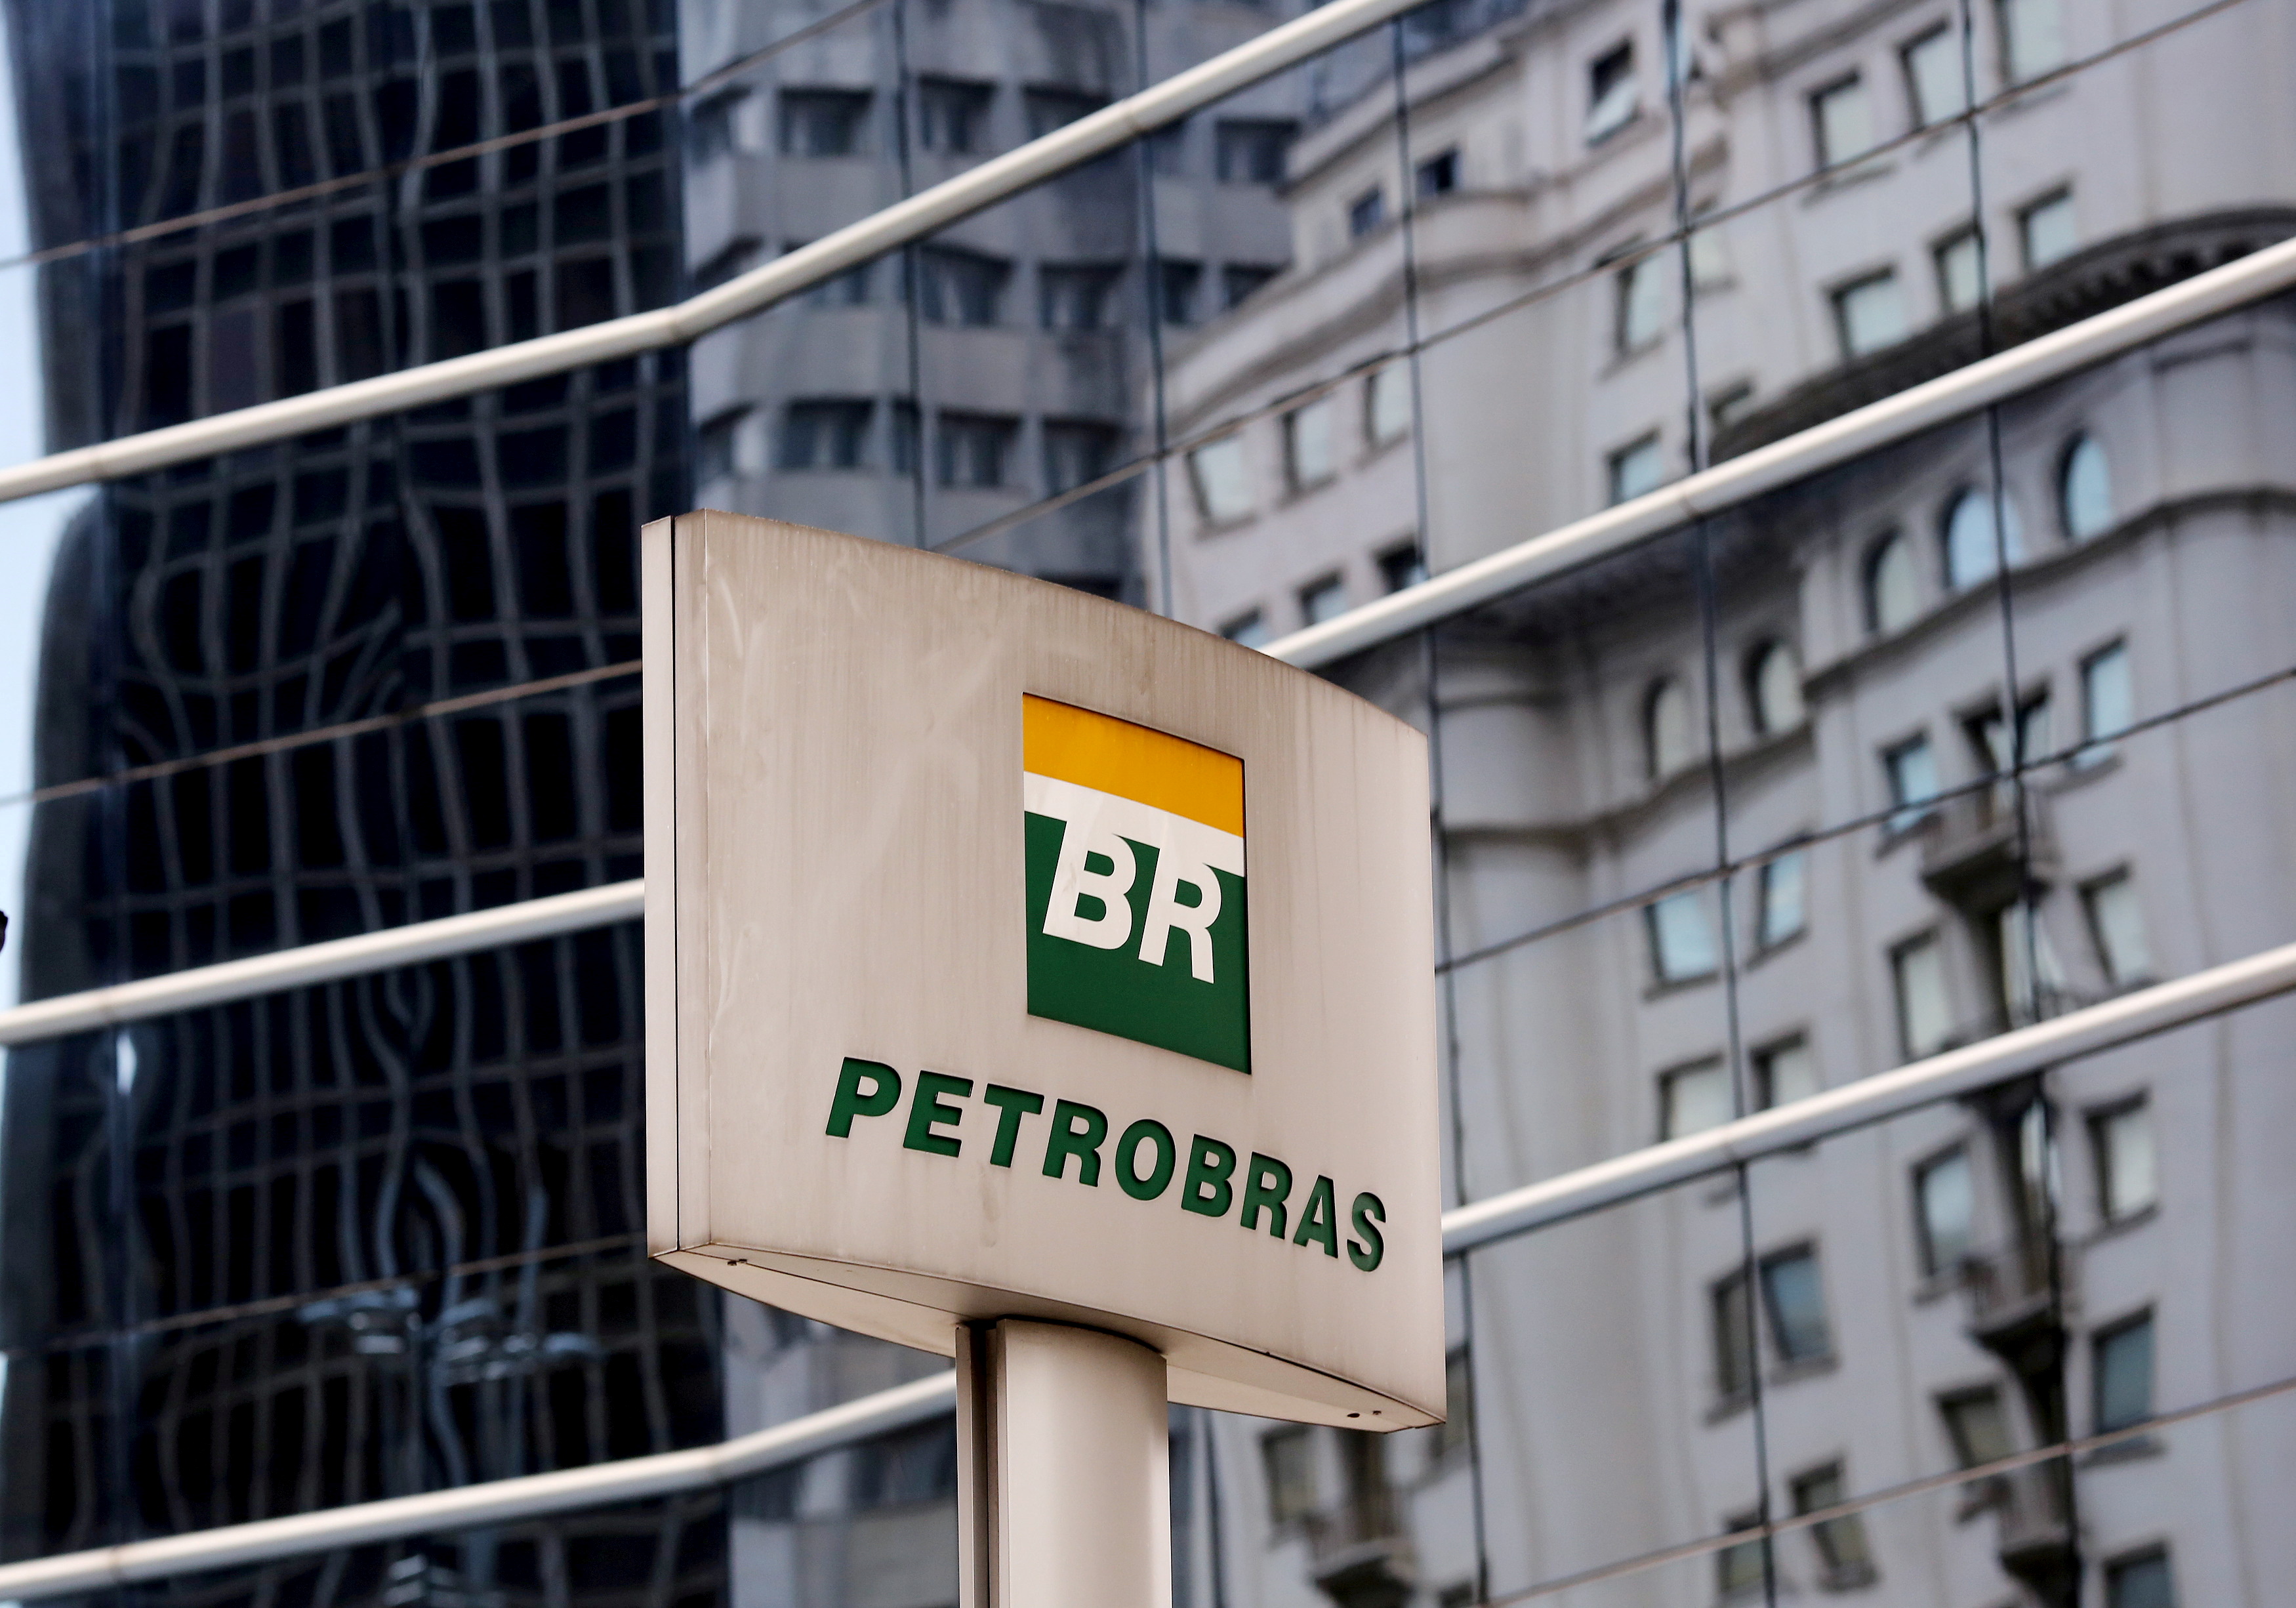 The Petrobras logo is seen in front of the company's headquarters in Sao Paulo April 23, 2015. REUTERS/Paulo Whitaker